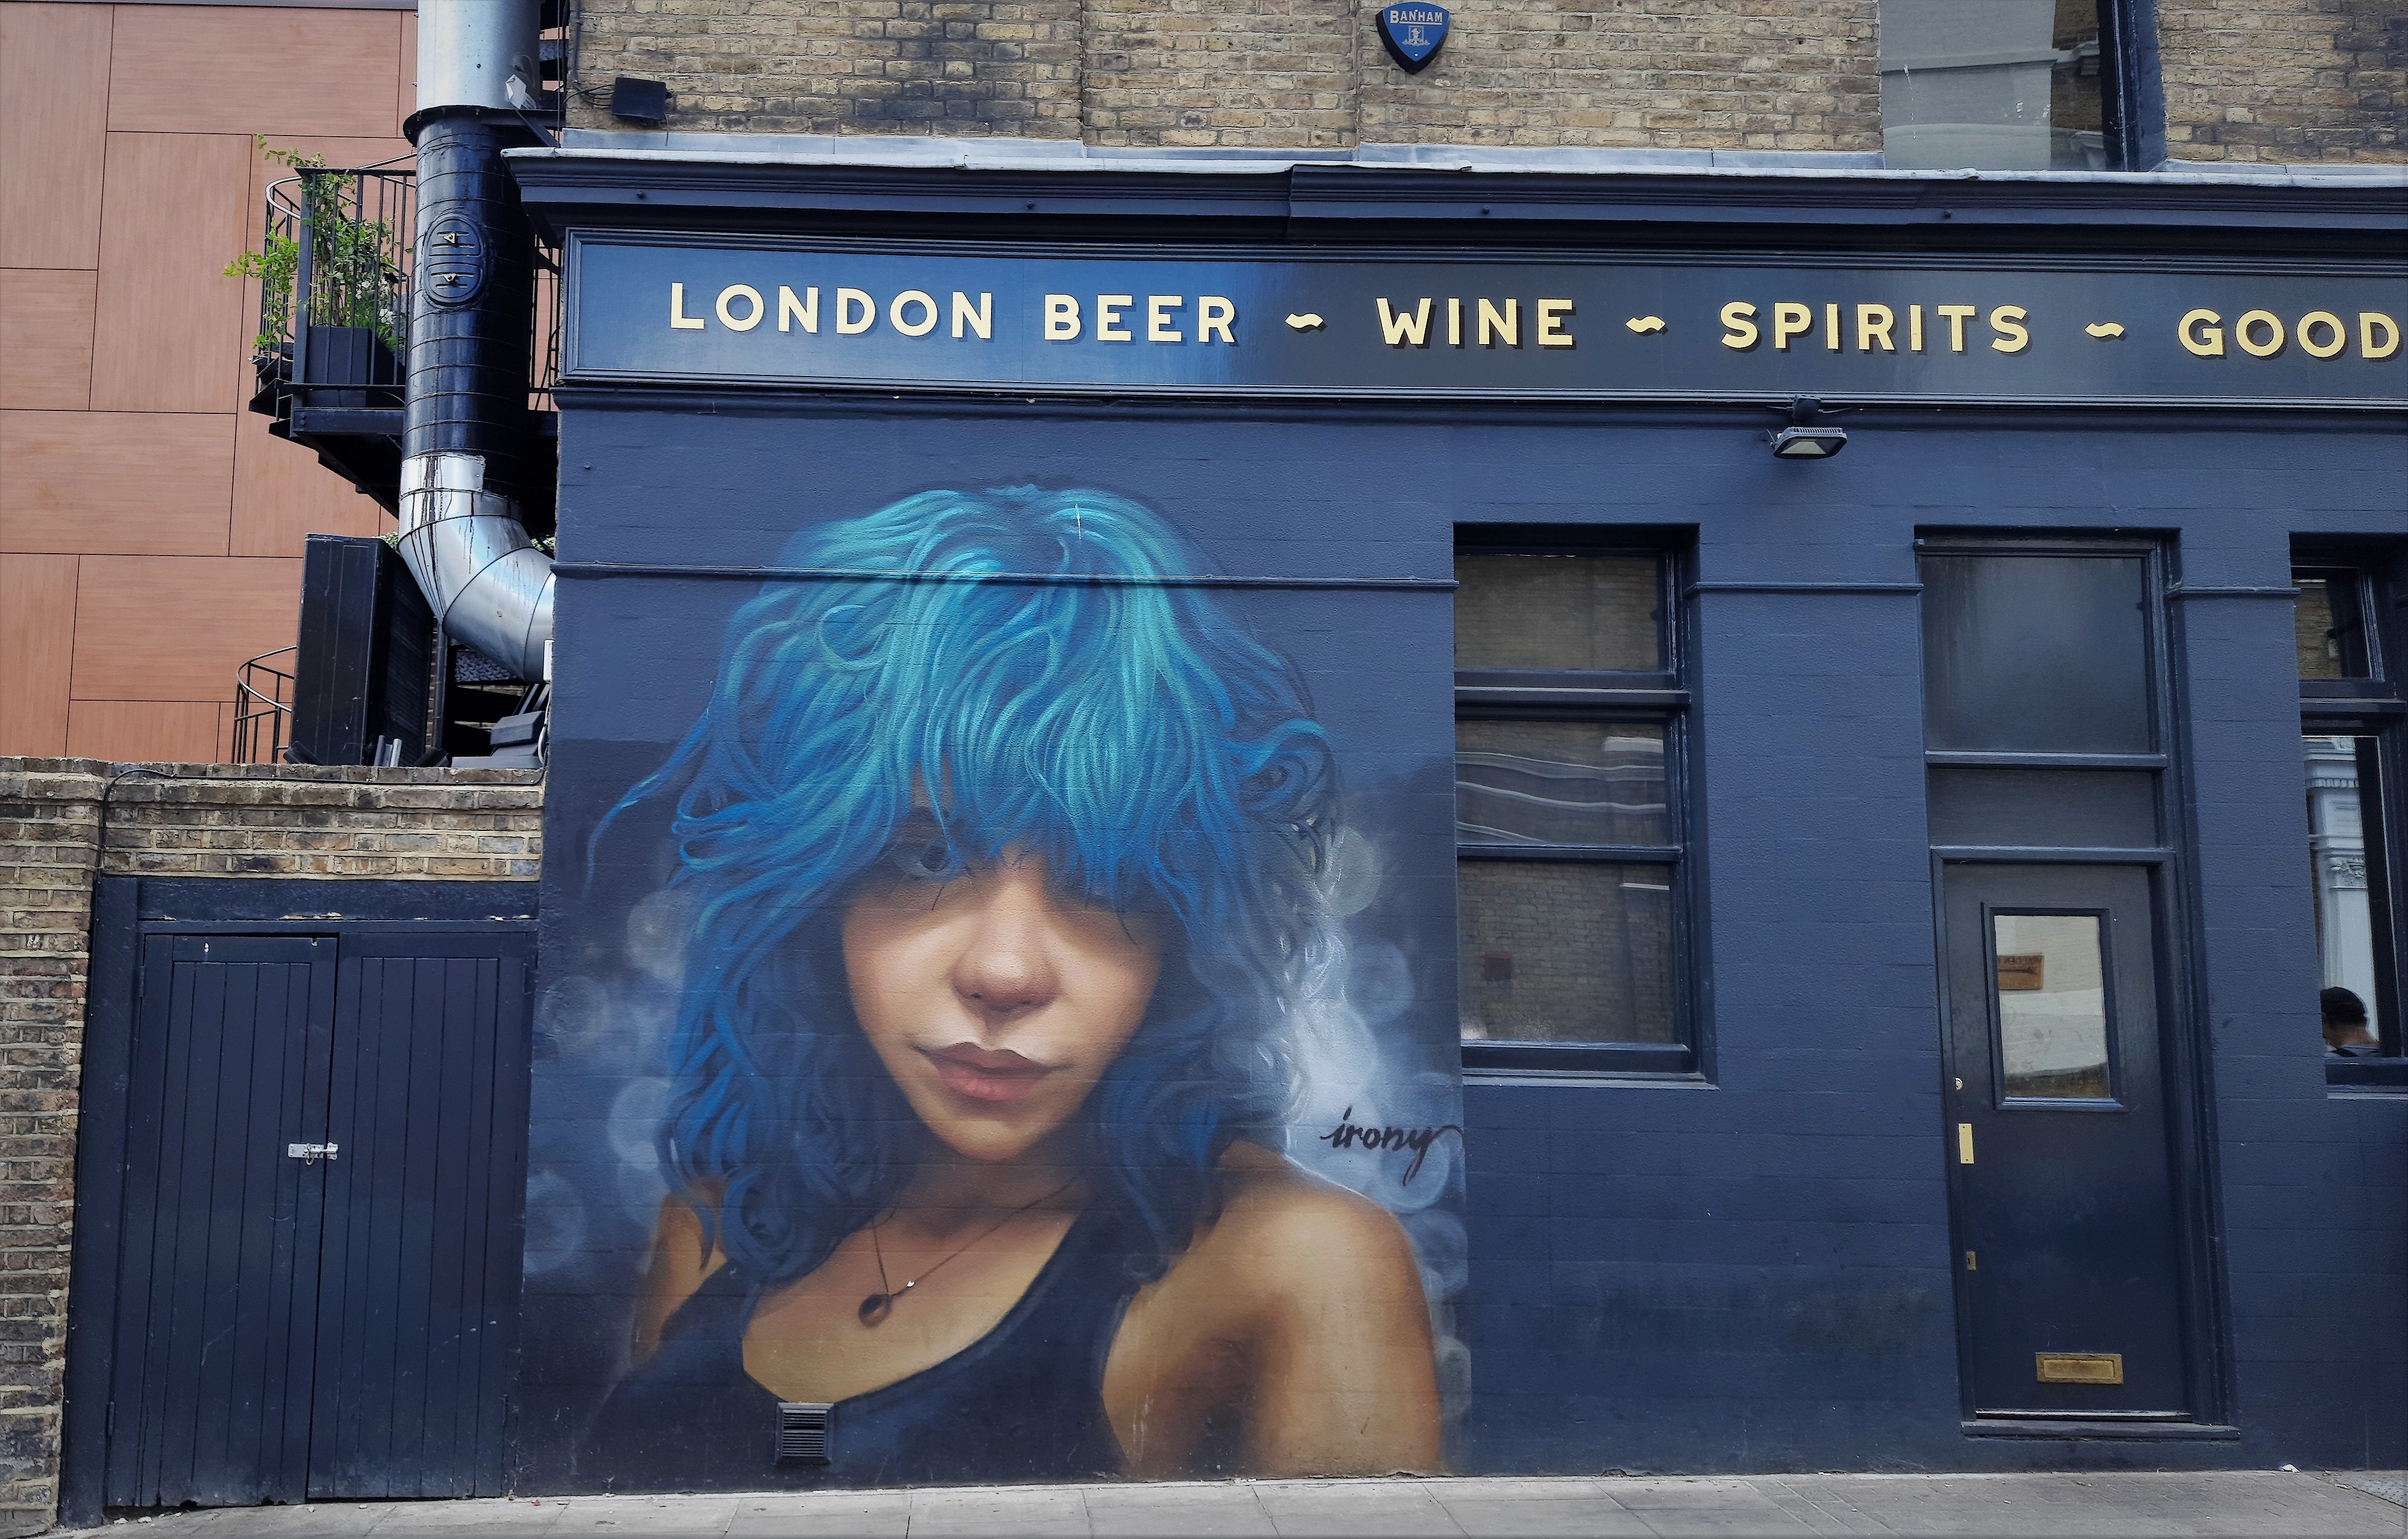 Graffiti 6543  by the artist IRONY captured by Mephisroth in London United Kingdom